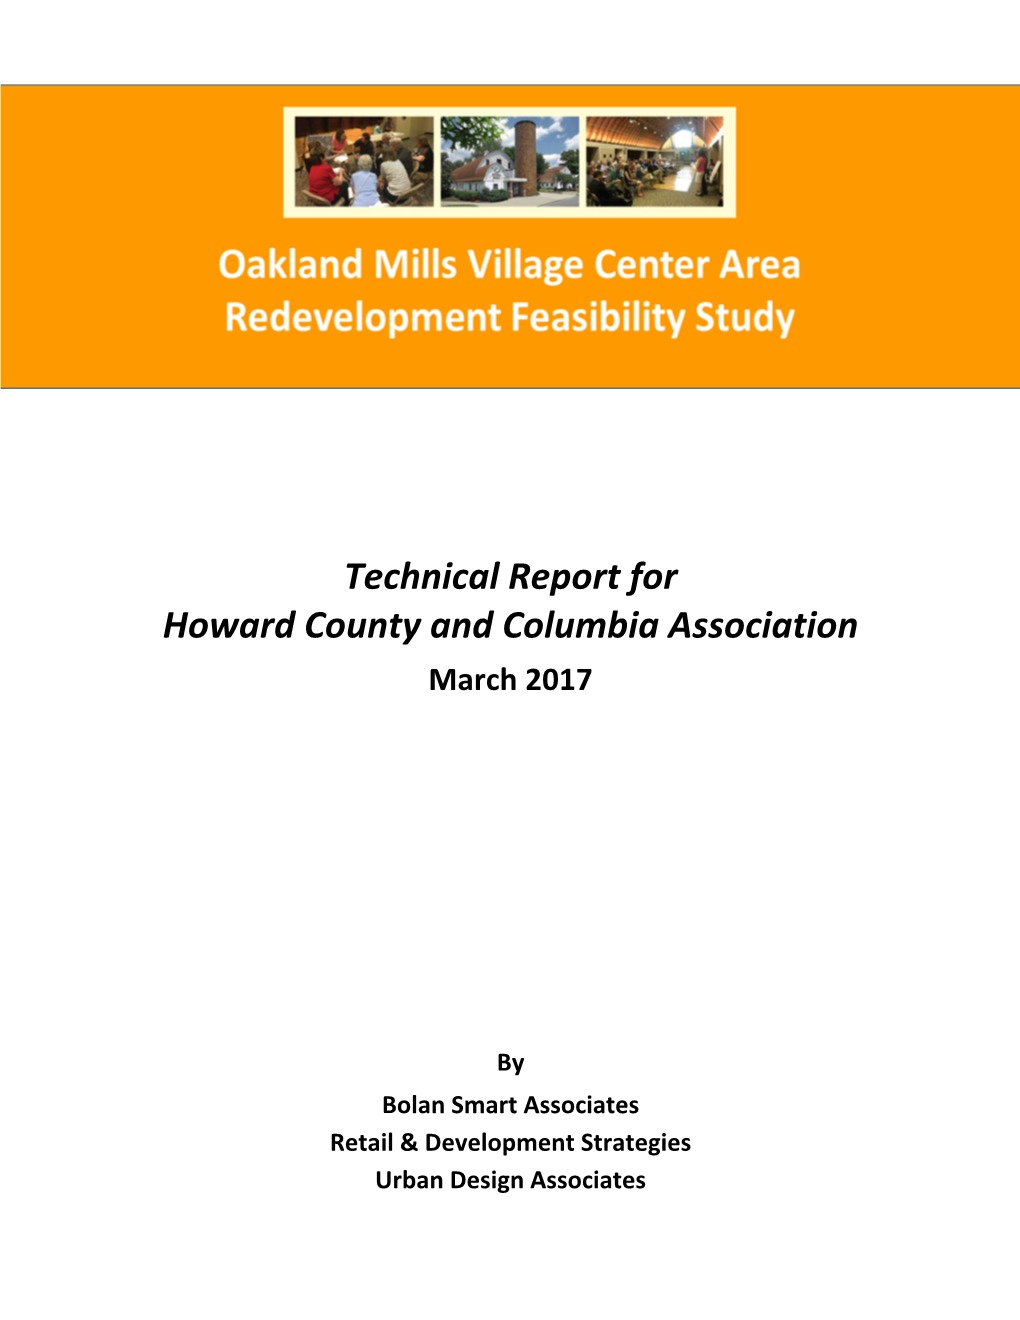 Technical Report for Howard County and Columbia Association March 2017